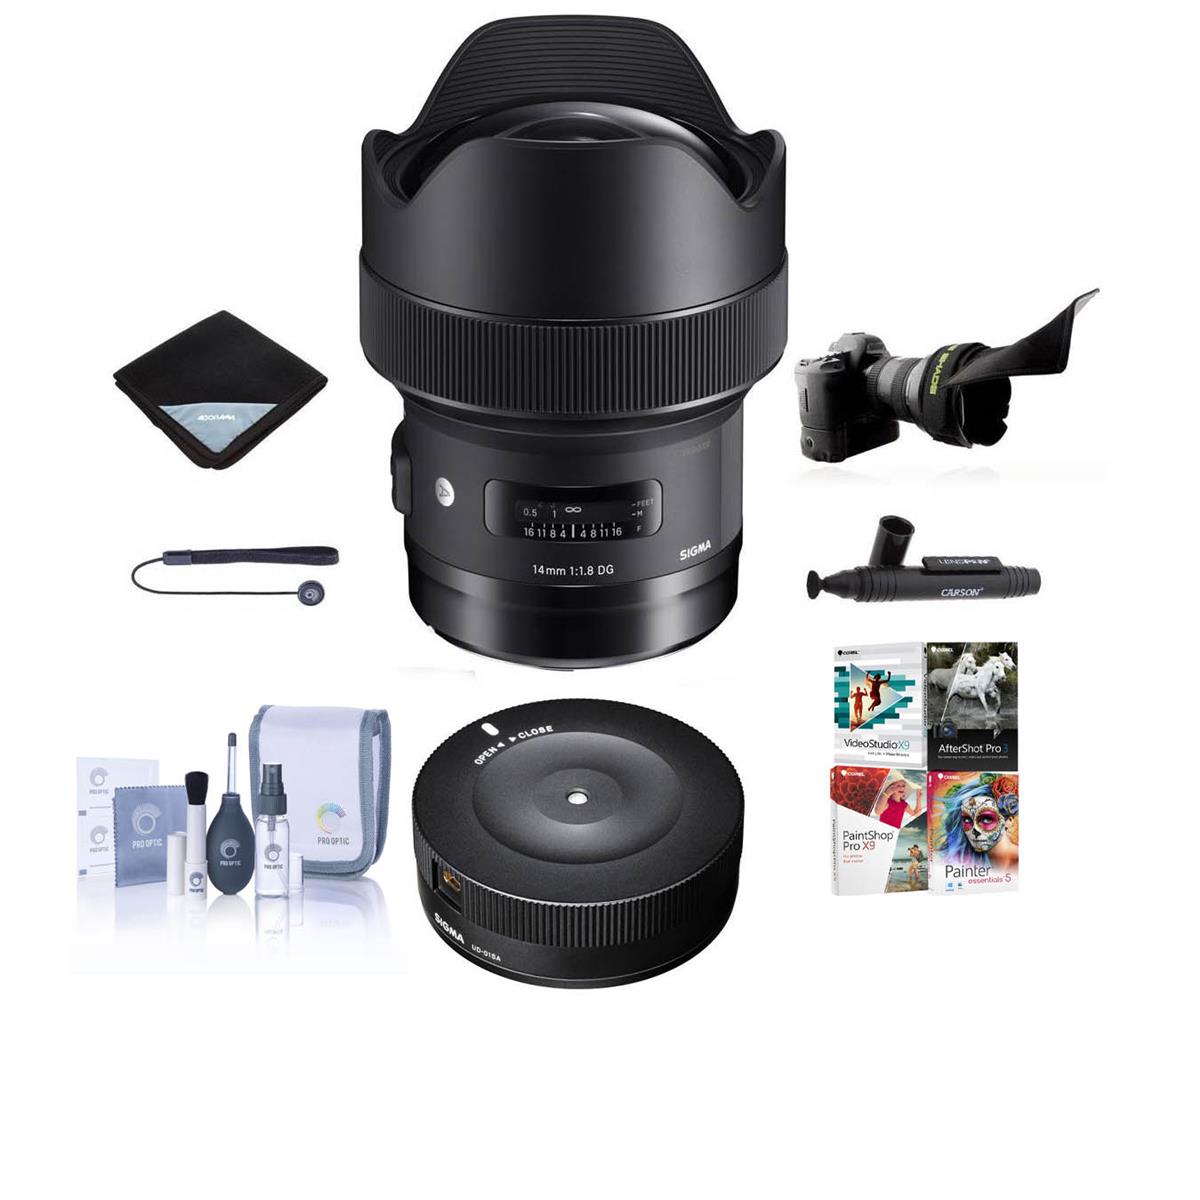 

Sigma 14mm f/1.8 DG HSM ART Lens for Nikon F with Free PC Software & Acc Kit